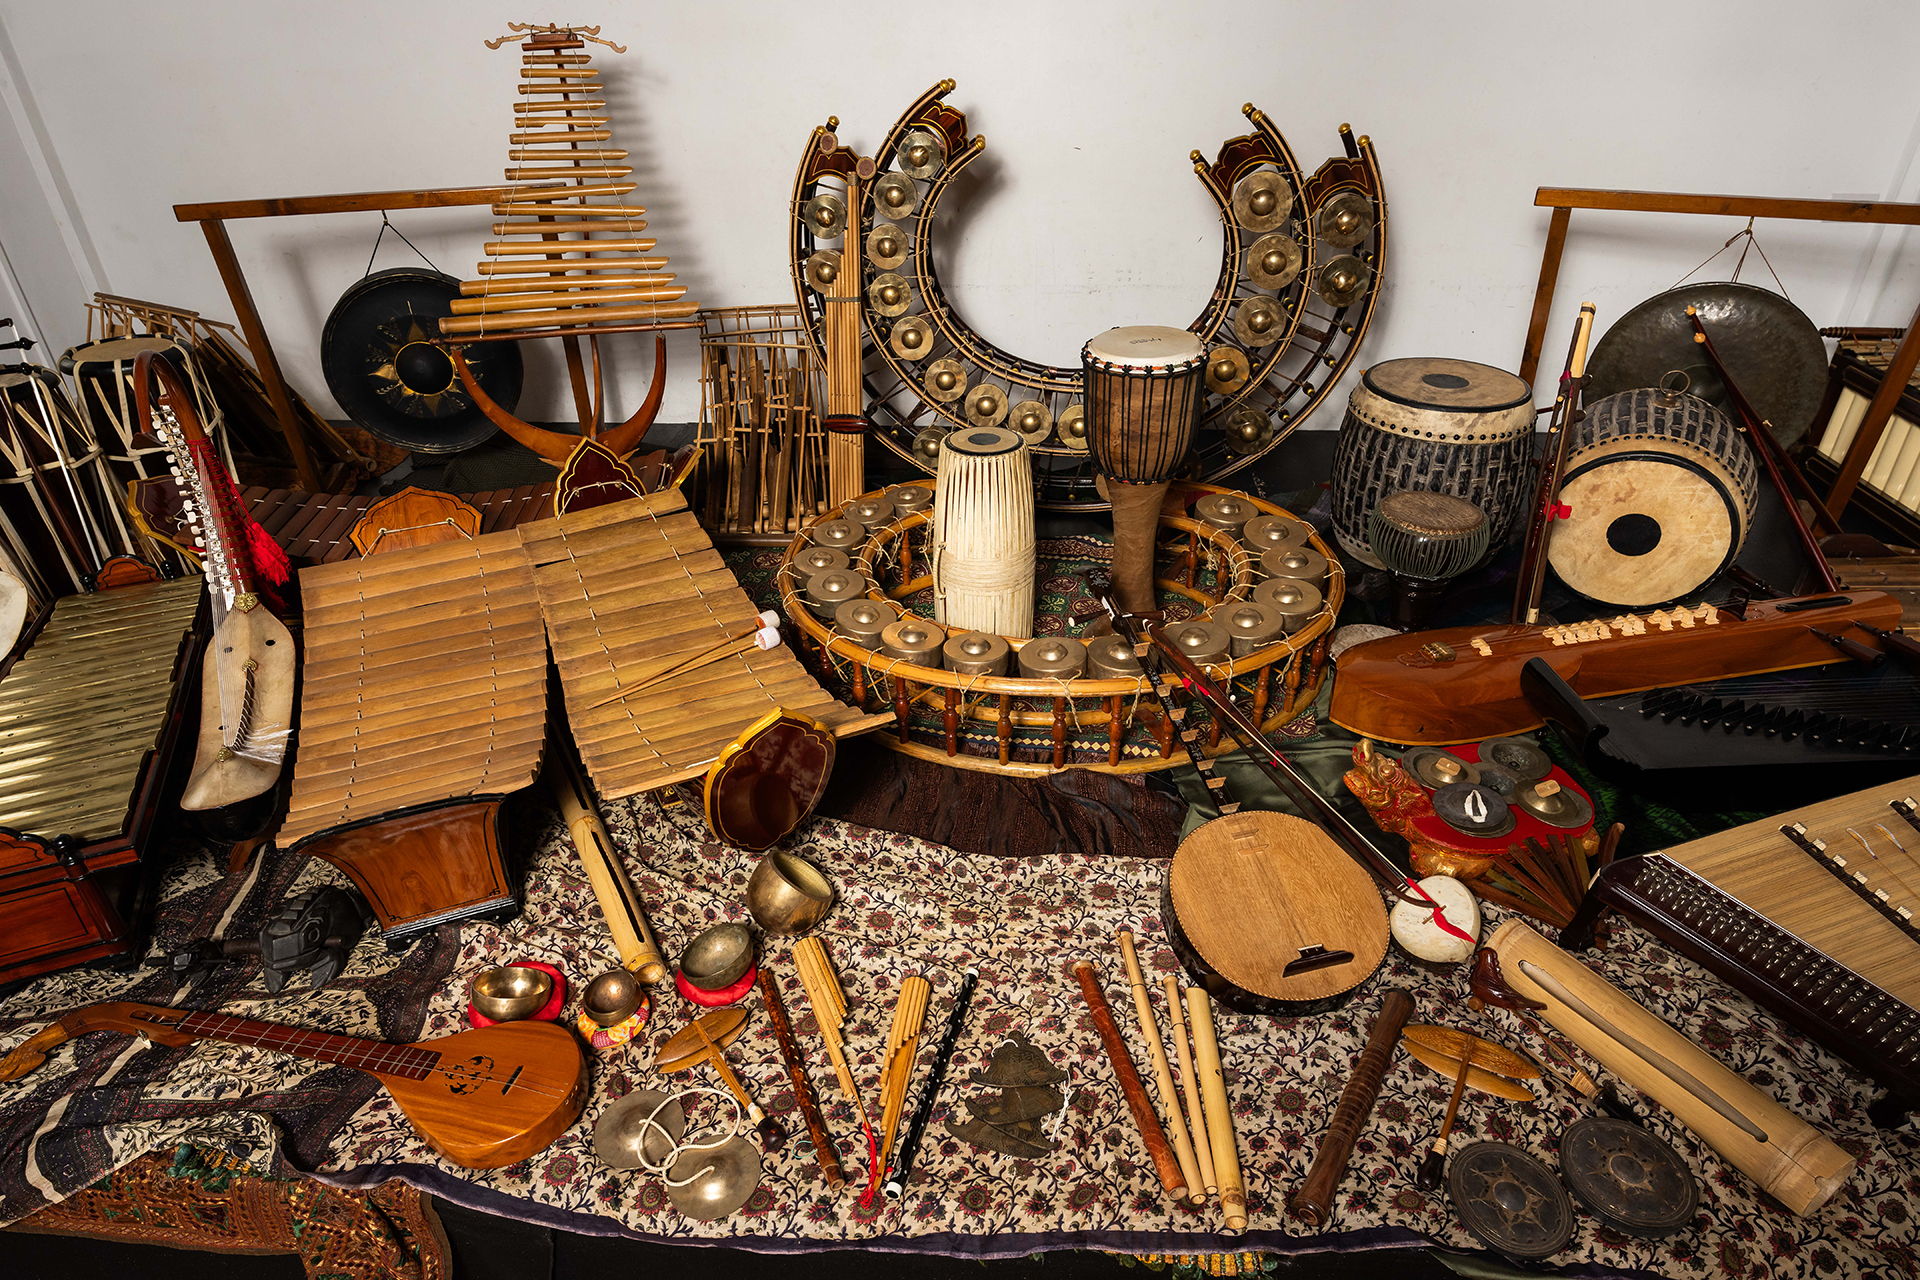 The instrument selection represents musical traditions from across the geographic region of Southeast Asia.